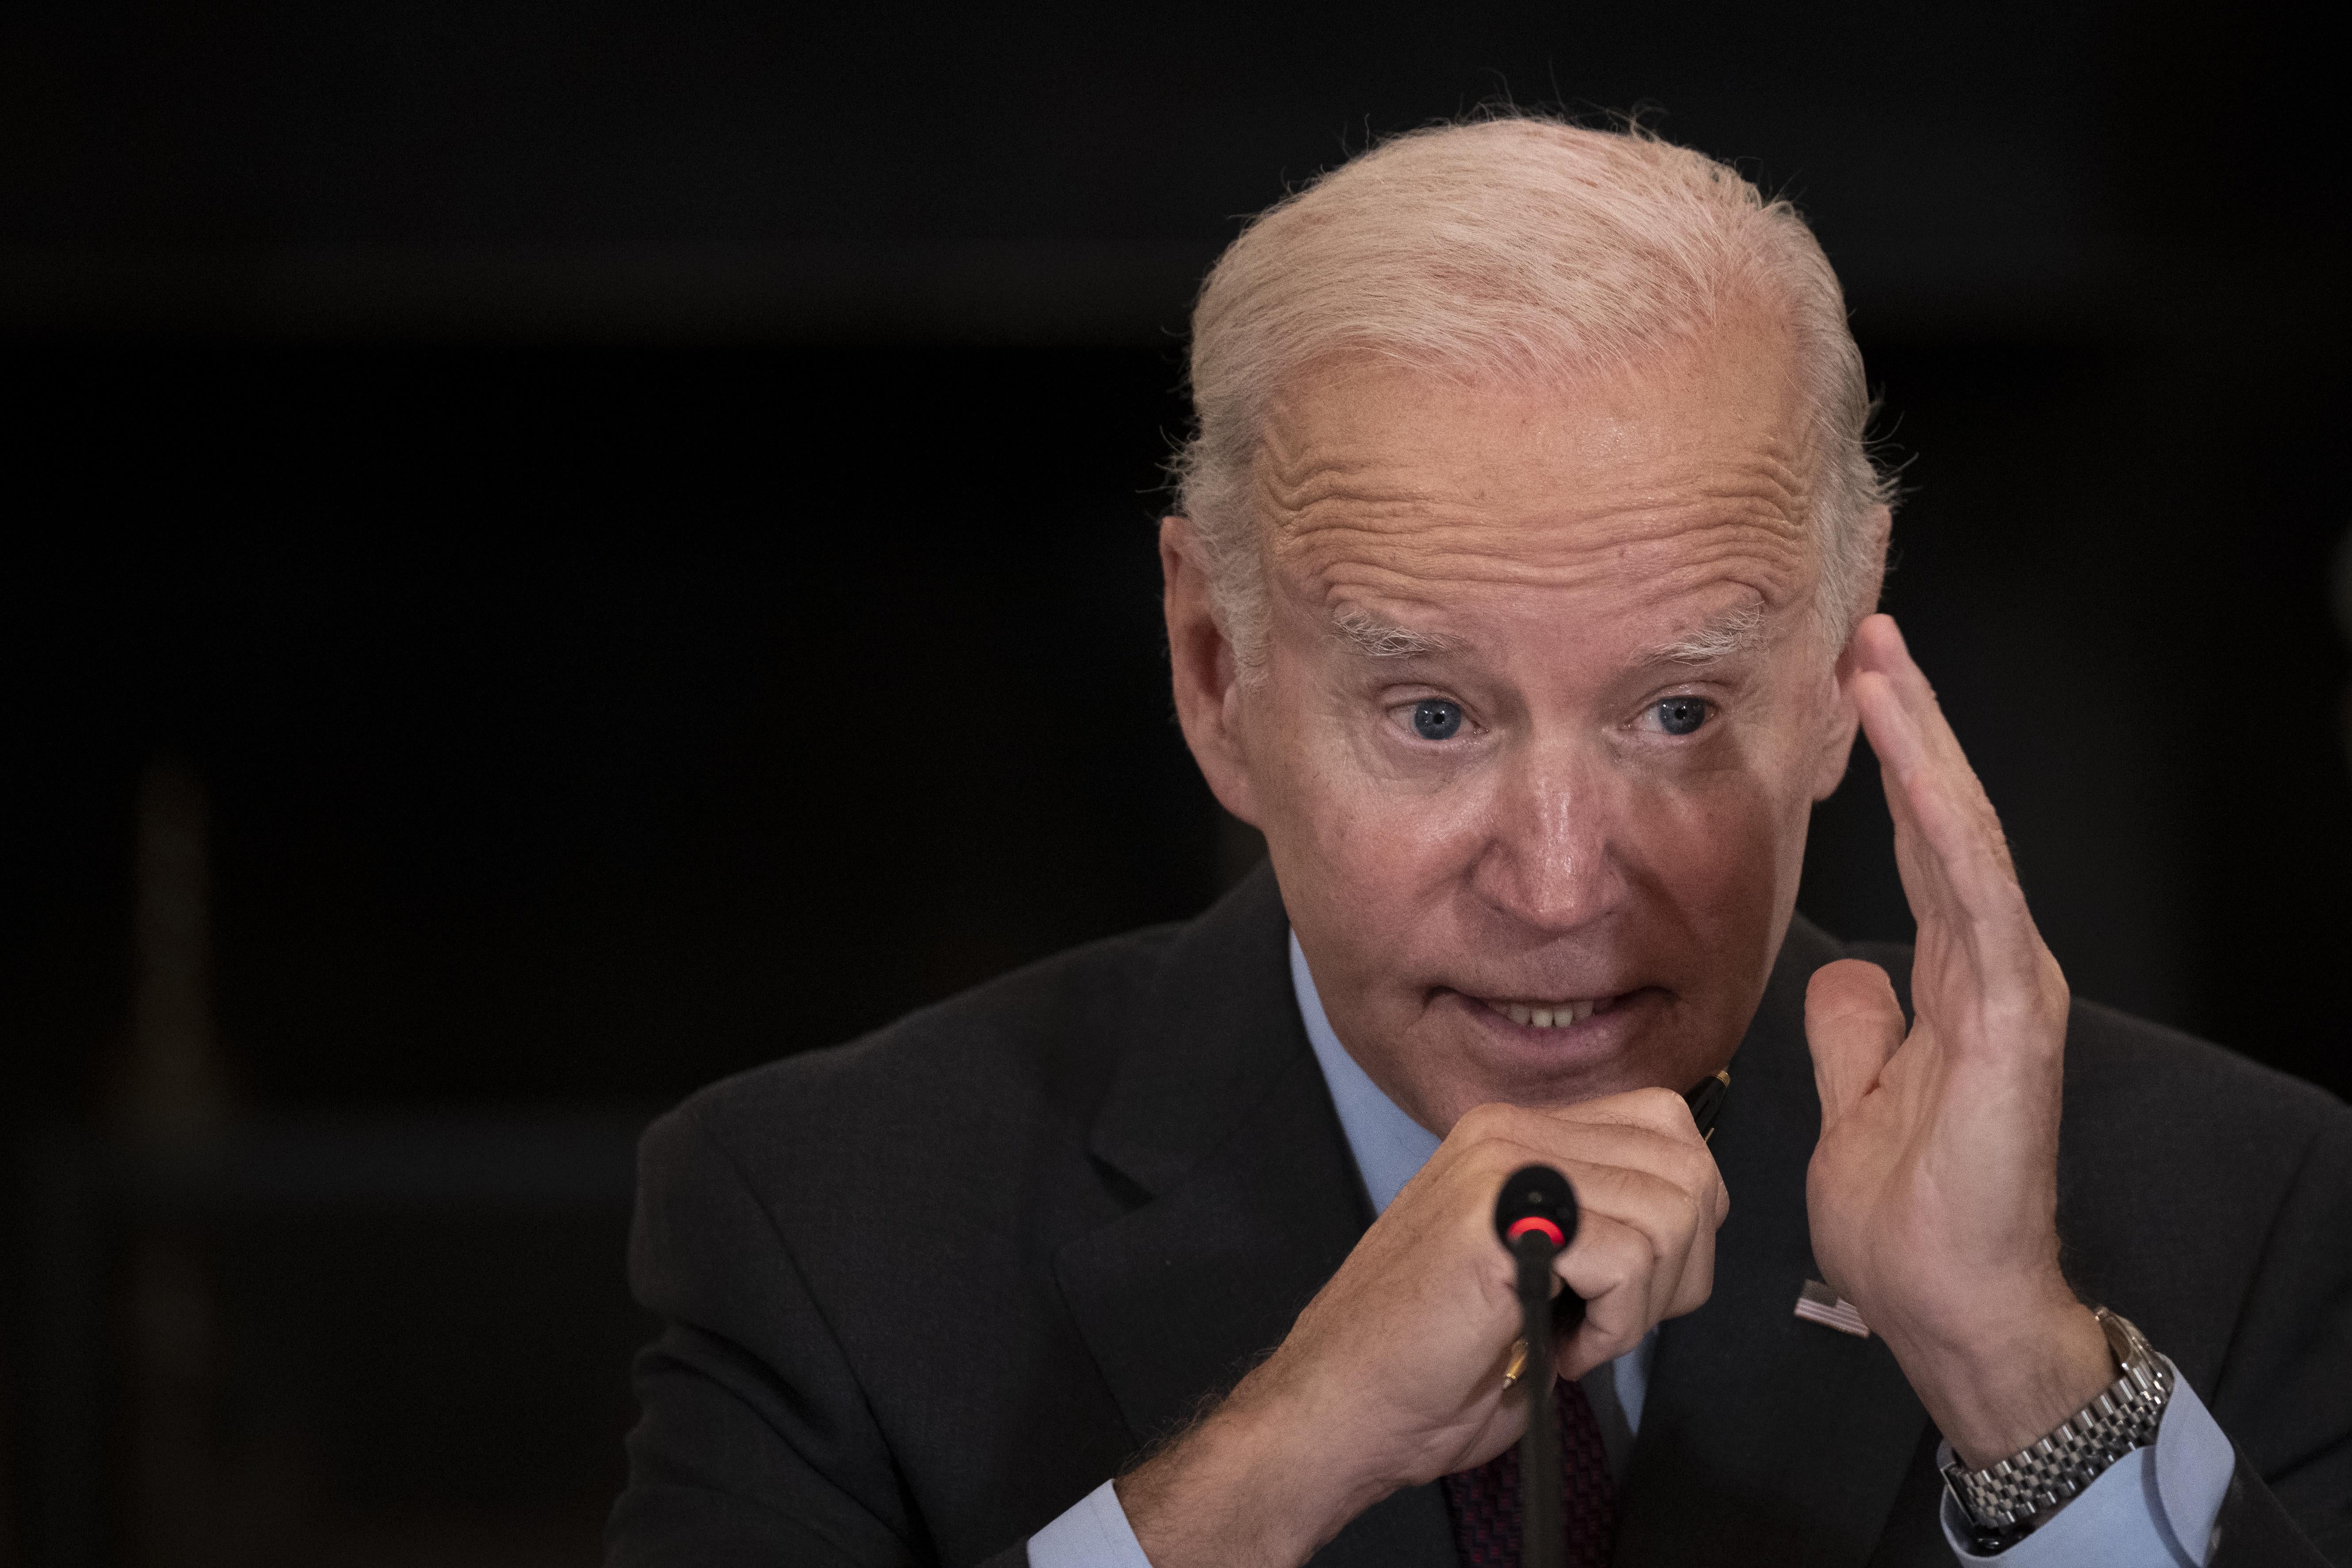 Biden speaking into a microphone with his left hand raised next to his face